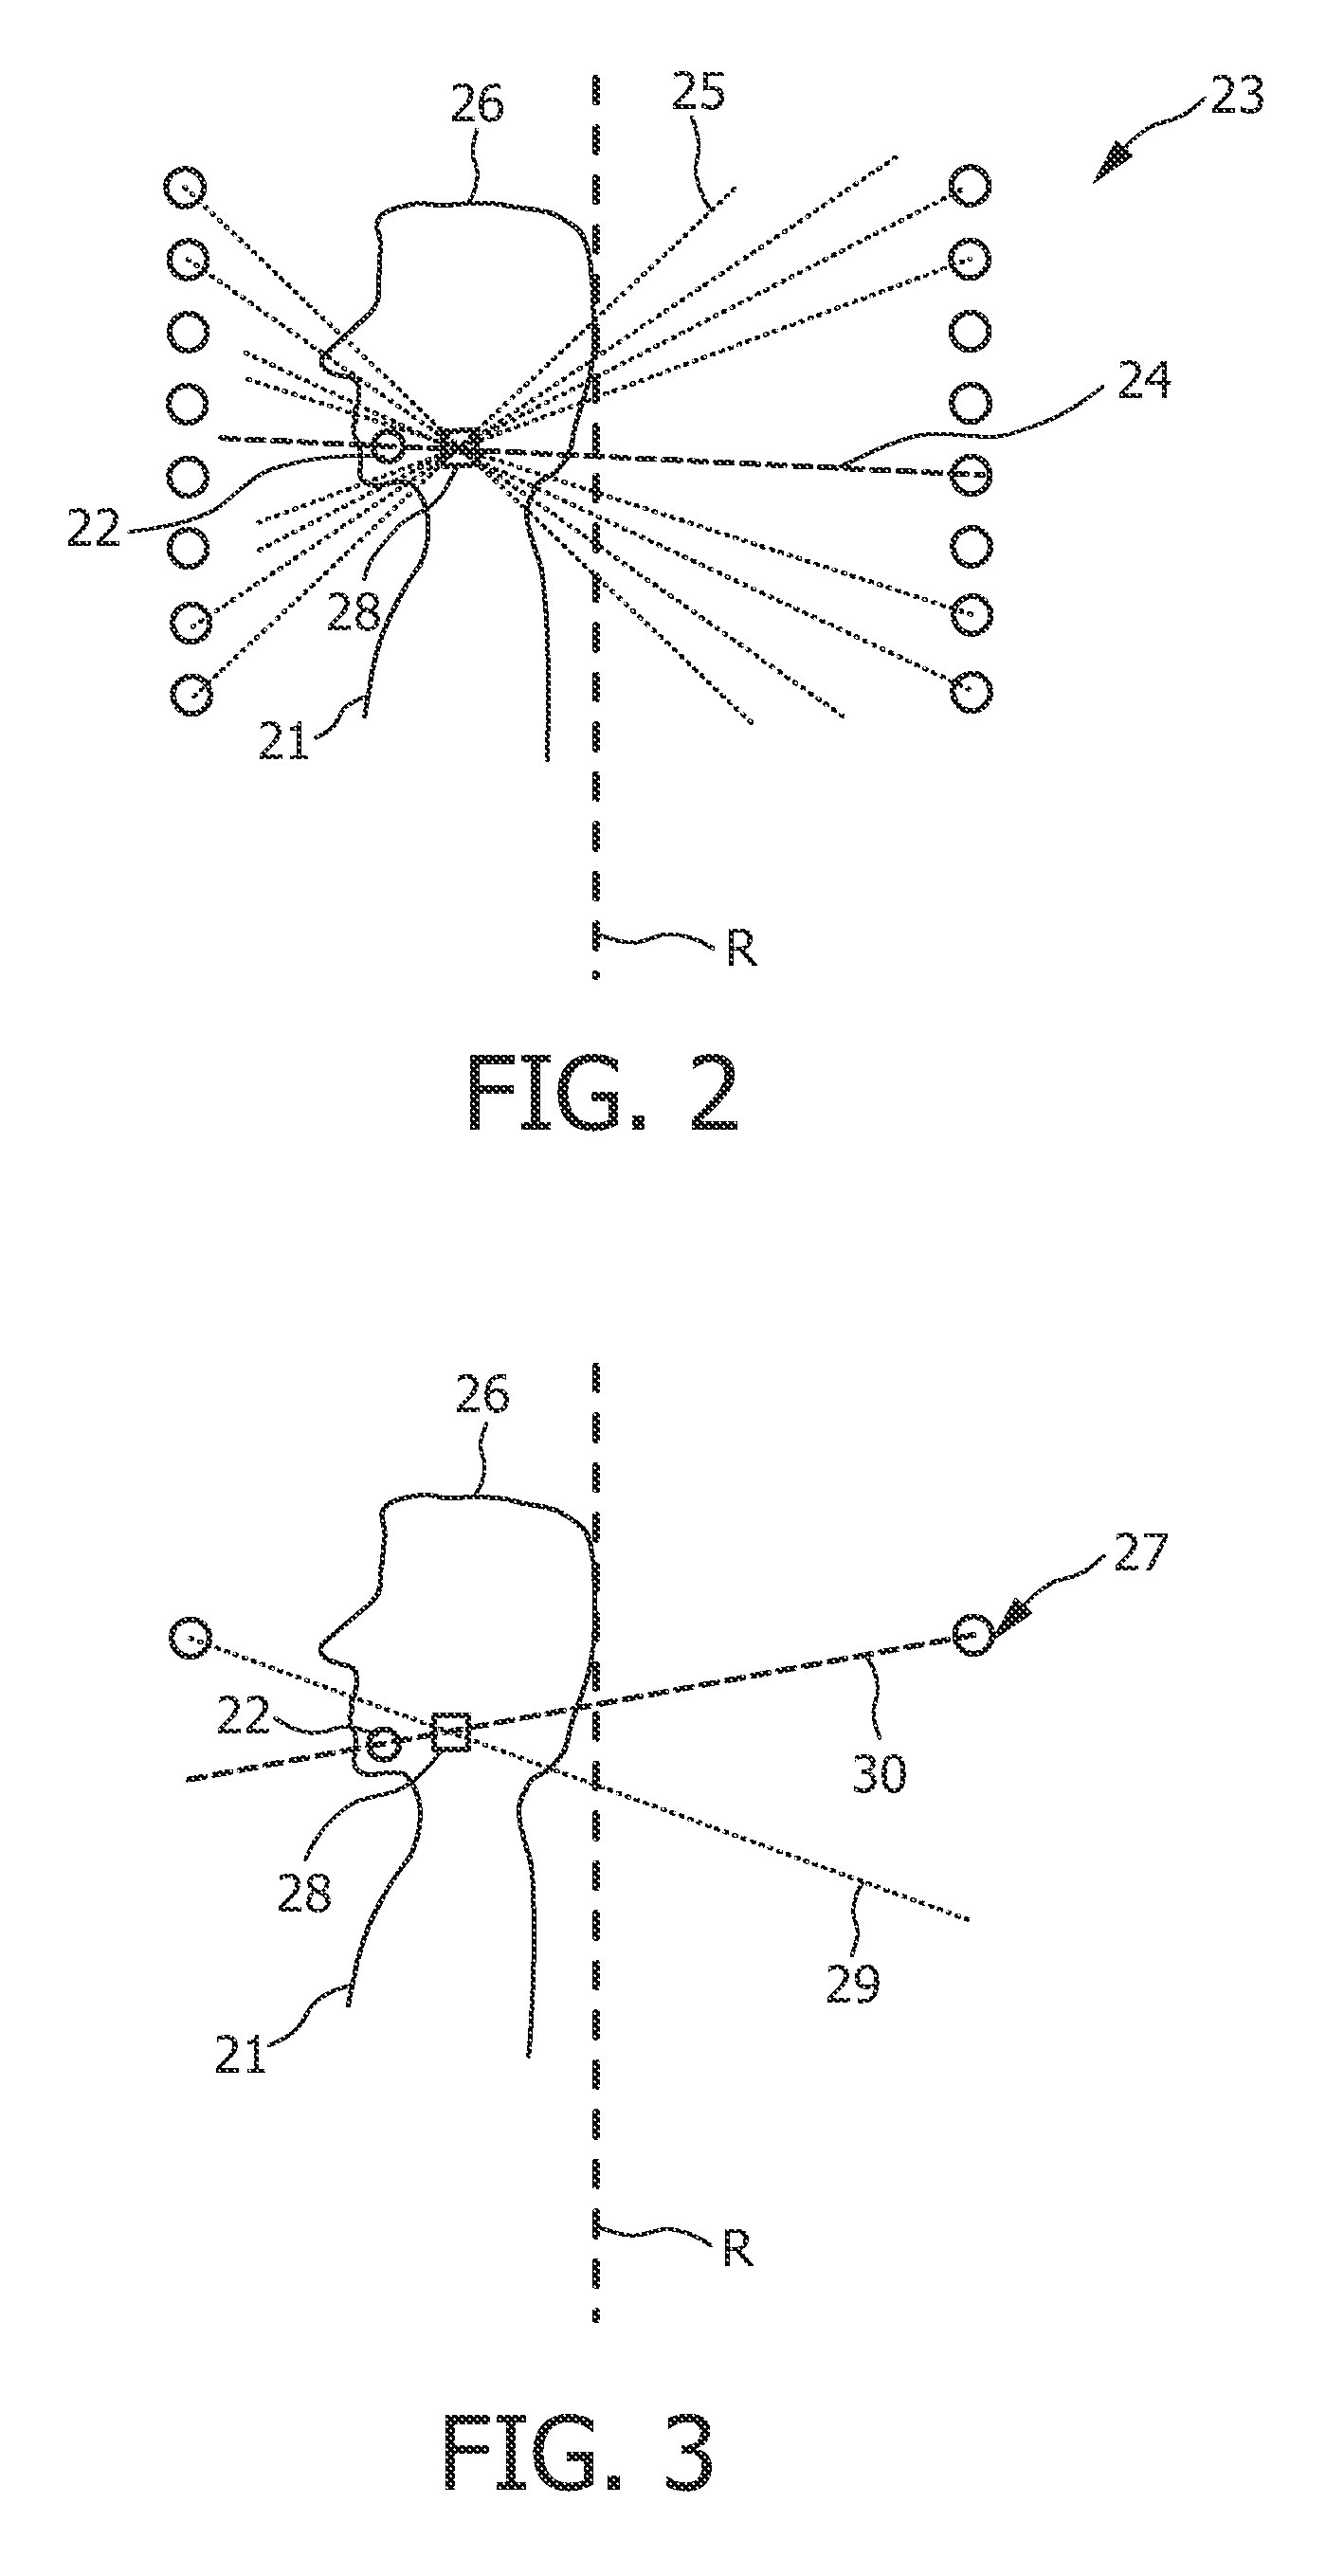 Imaging apparatus for generating an image of a region of interest